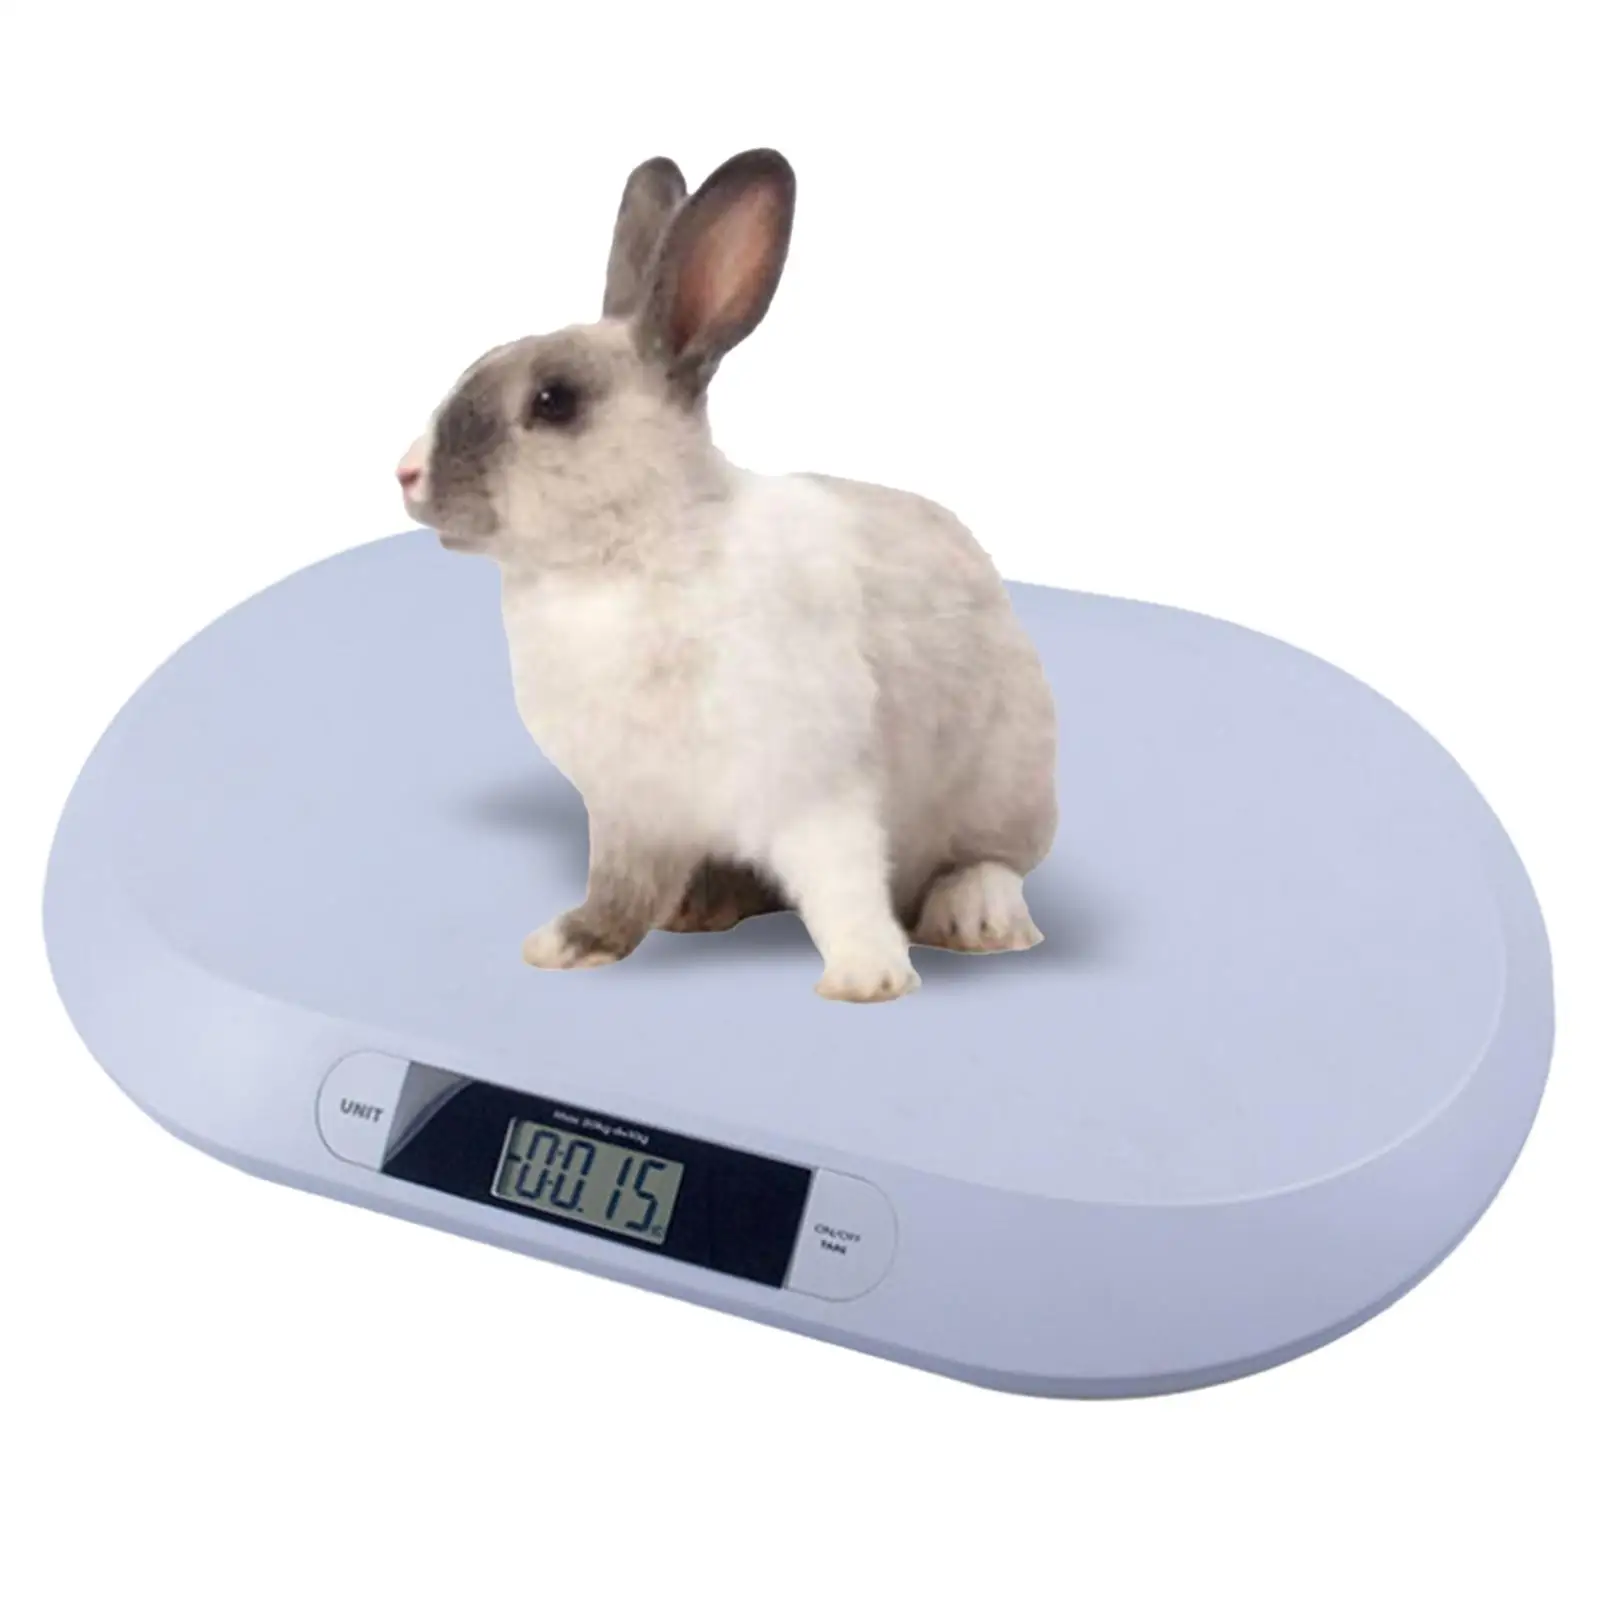 Digital Baby  44.1lb, Accurate Multifunction LCD Display  Scale for Dogs Newborns Infants Cats Toddlers images - 3